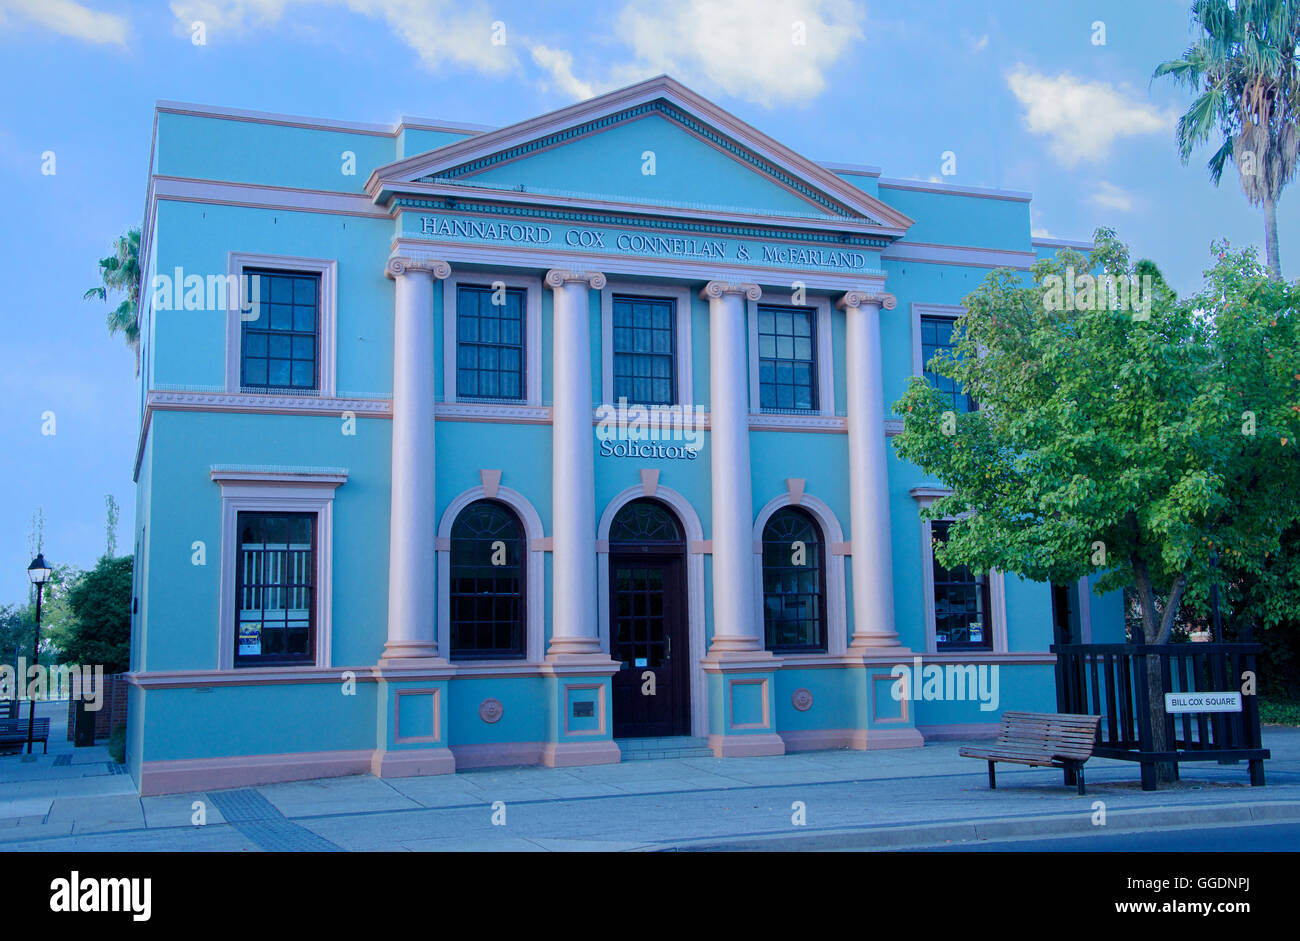 Grand building now housing solicitors firm Mudgee NSW Australia Stock Photo